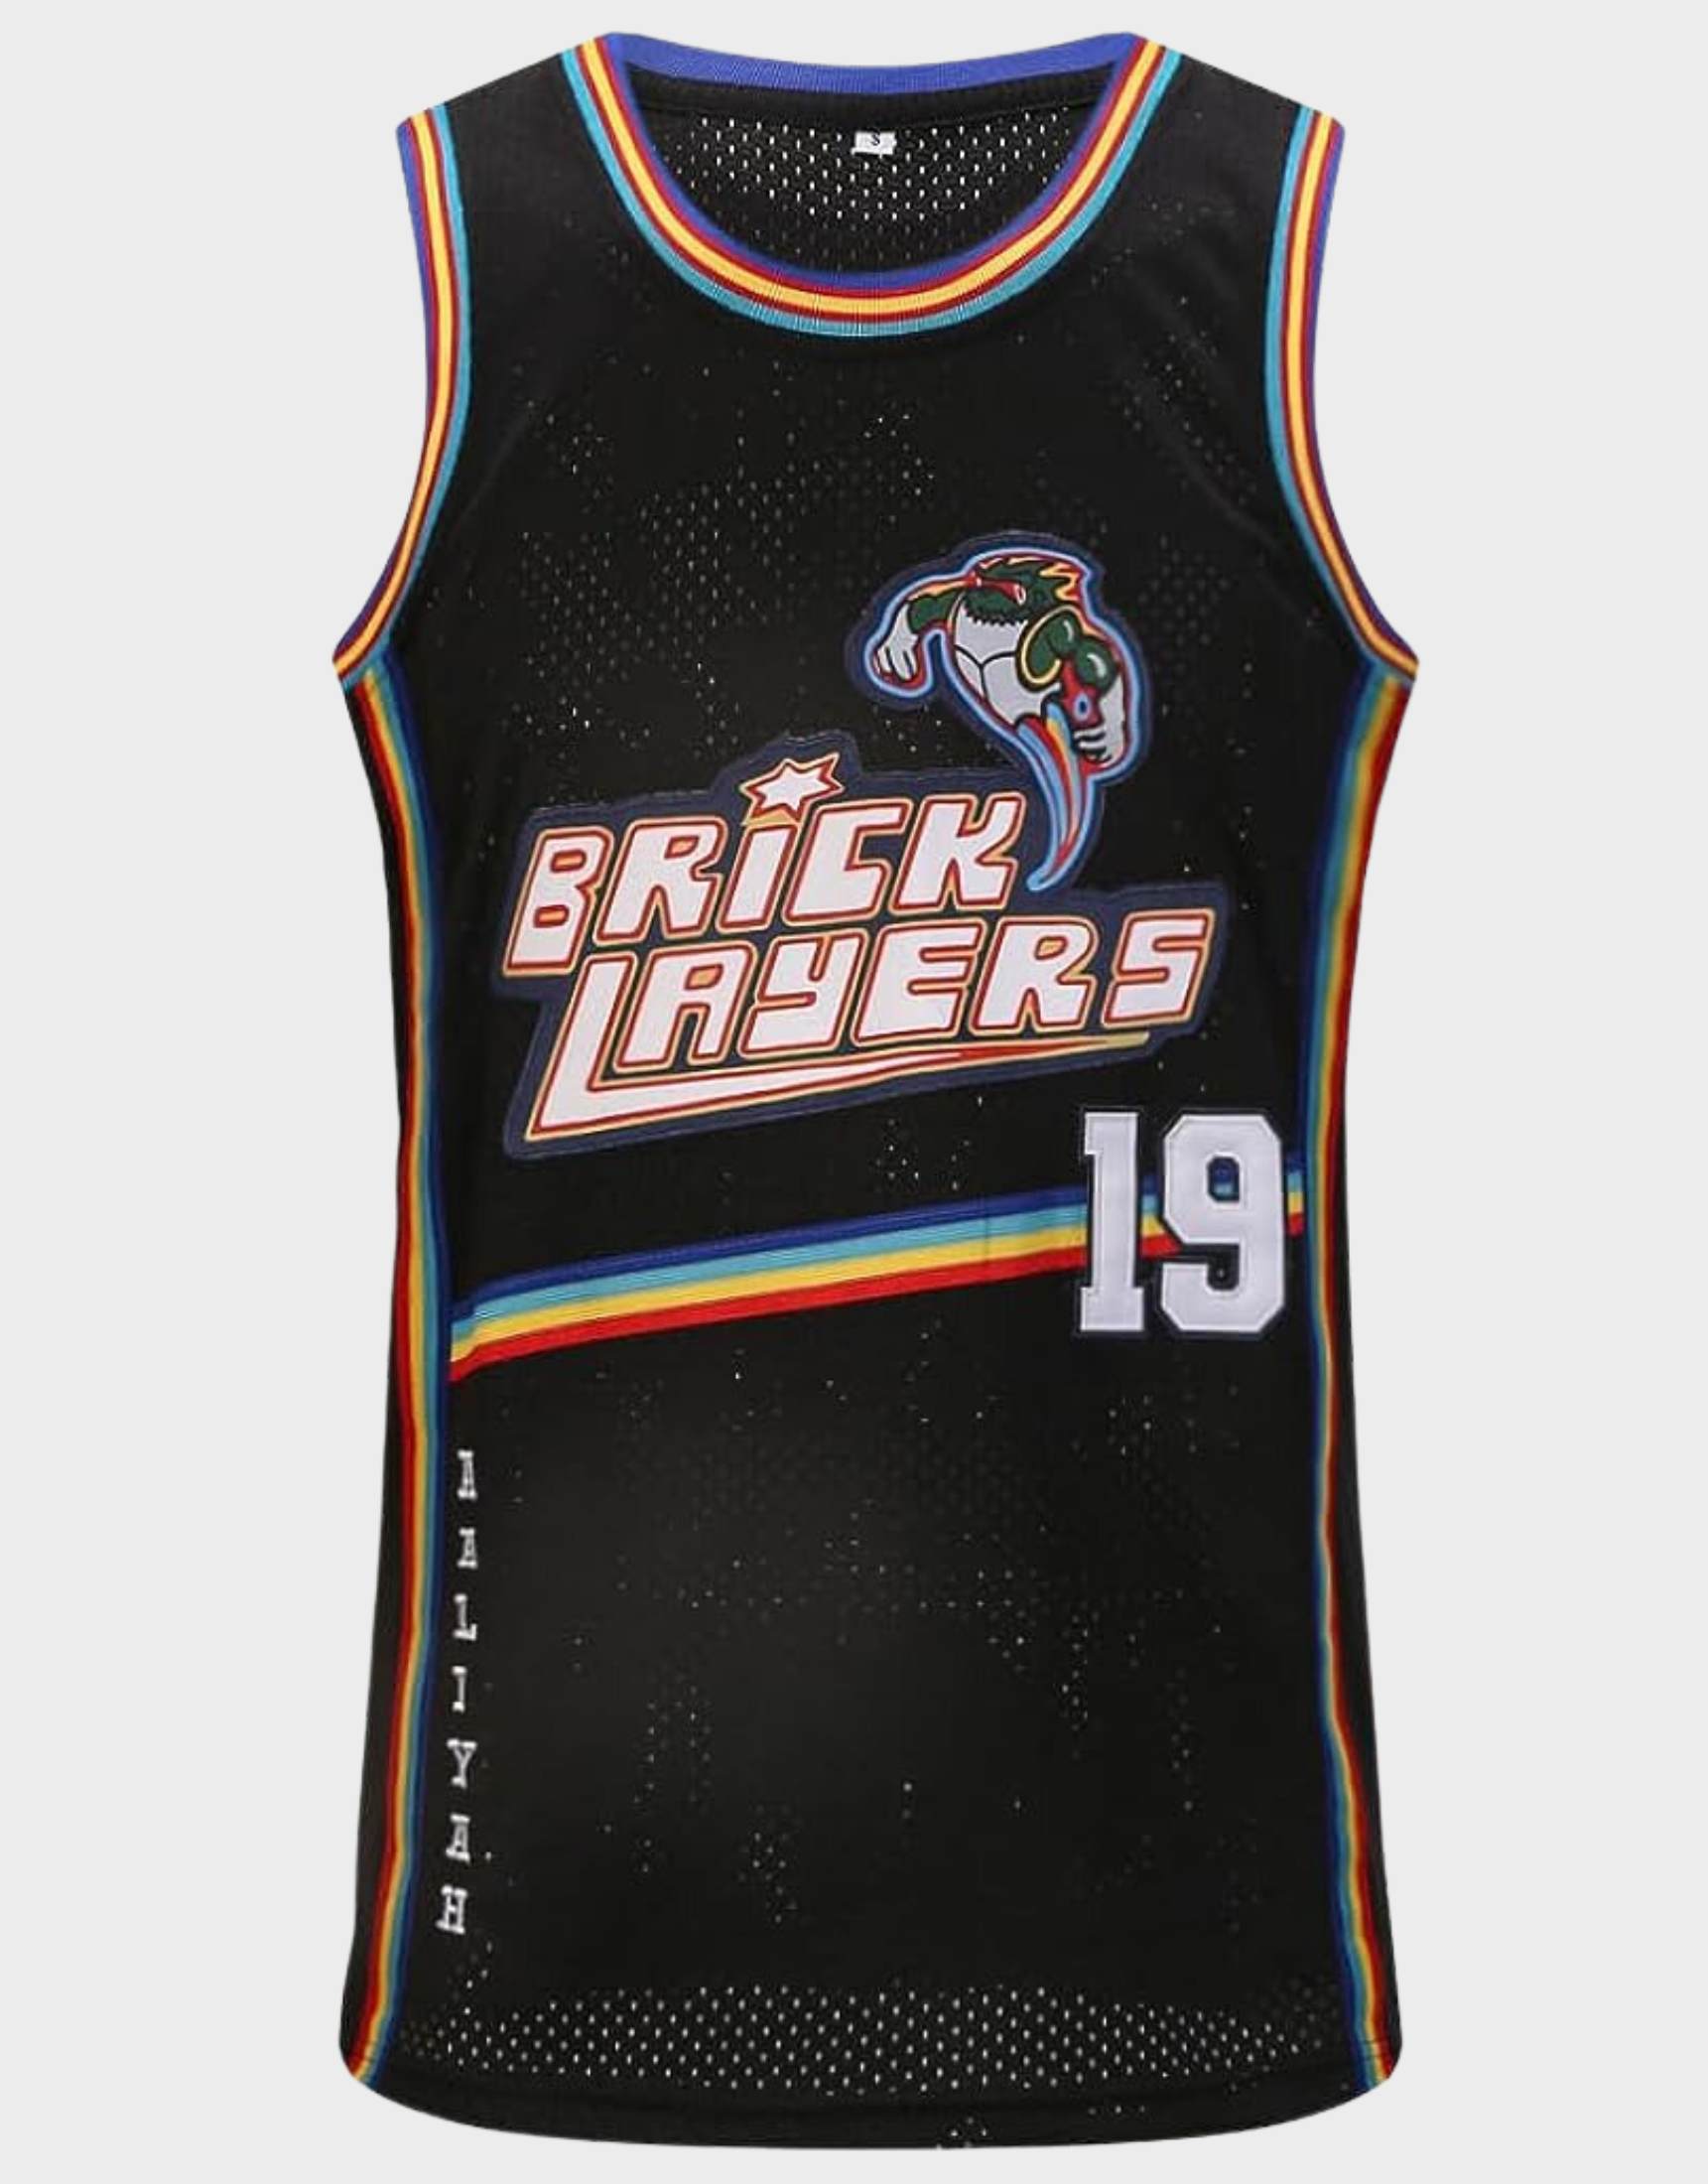 Brick layers Aaliyah inspired Jersey, could be used